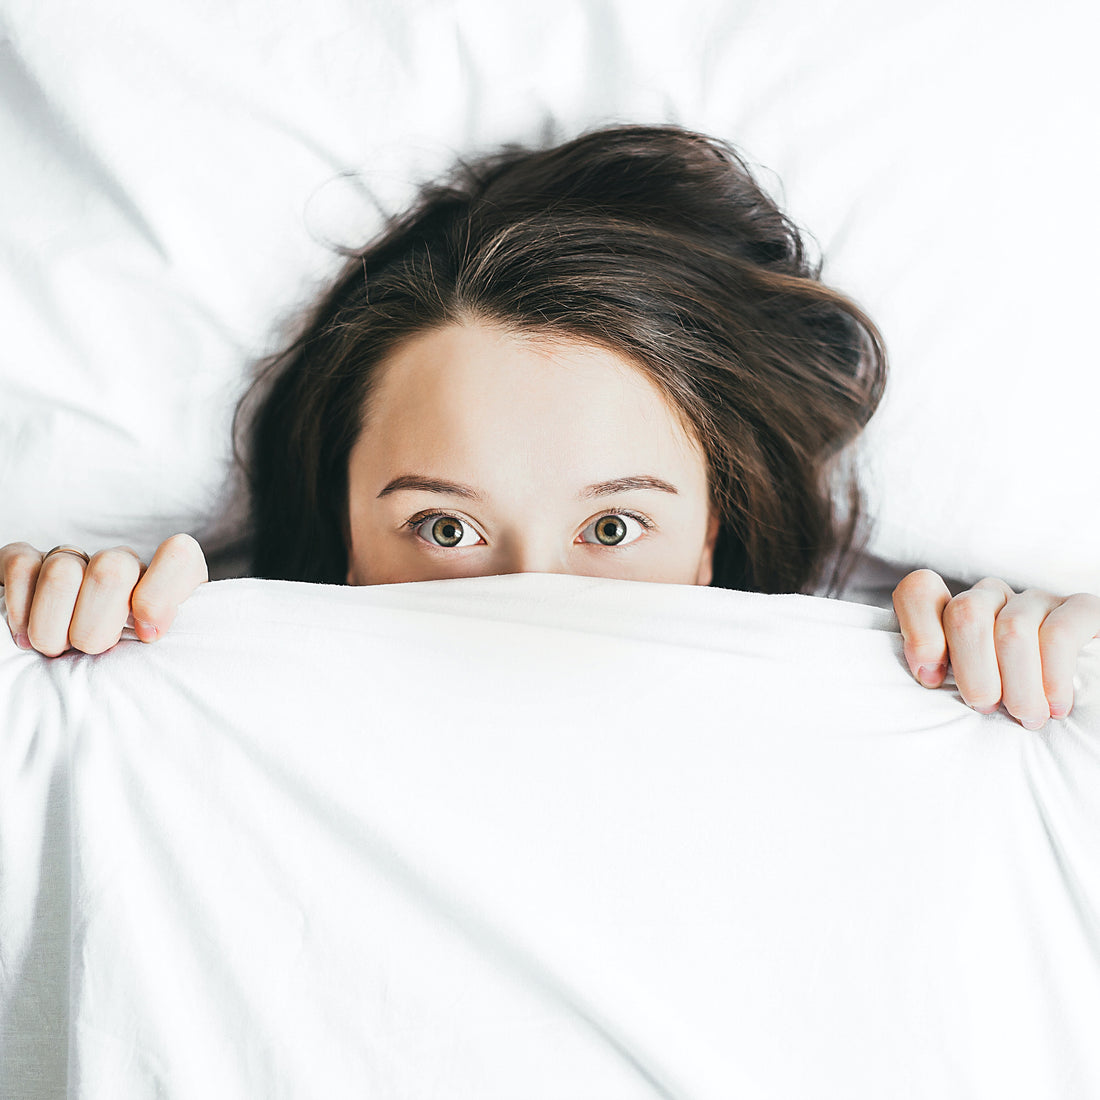 Struggling to sleep? Why it's so important and how to improve it.